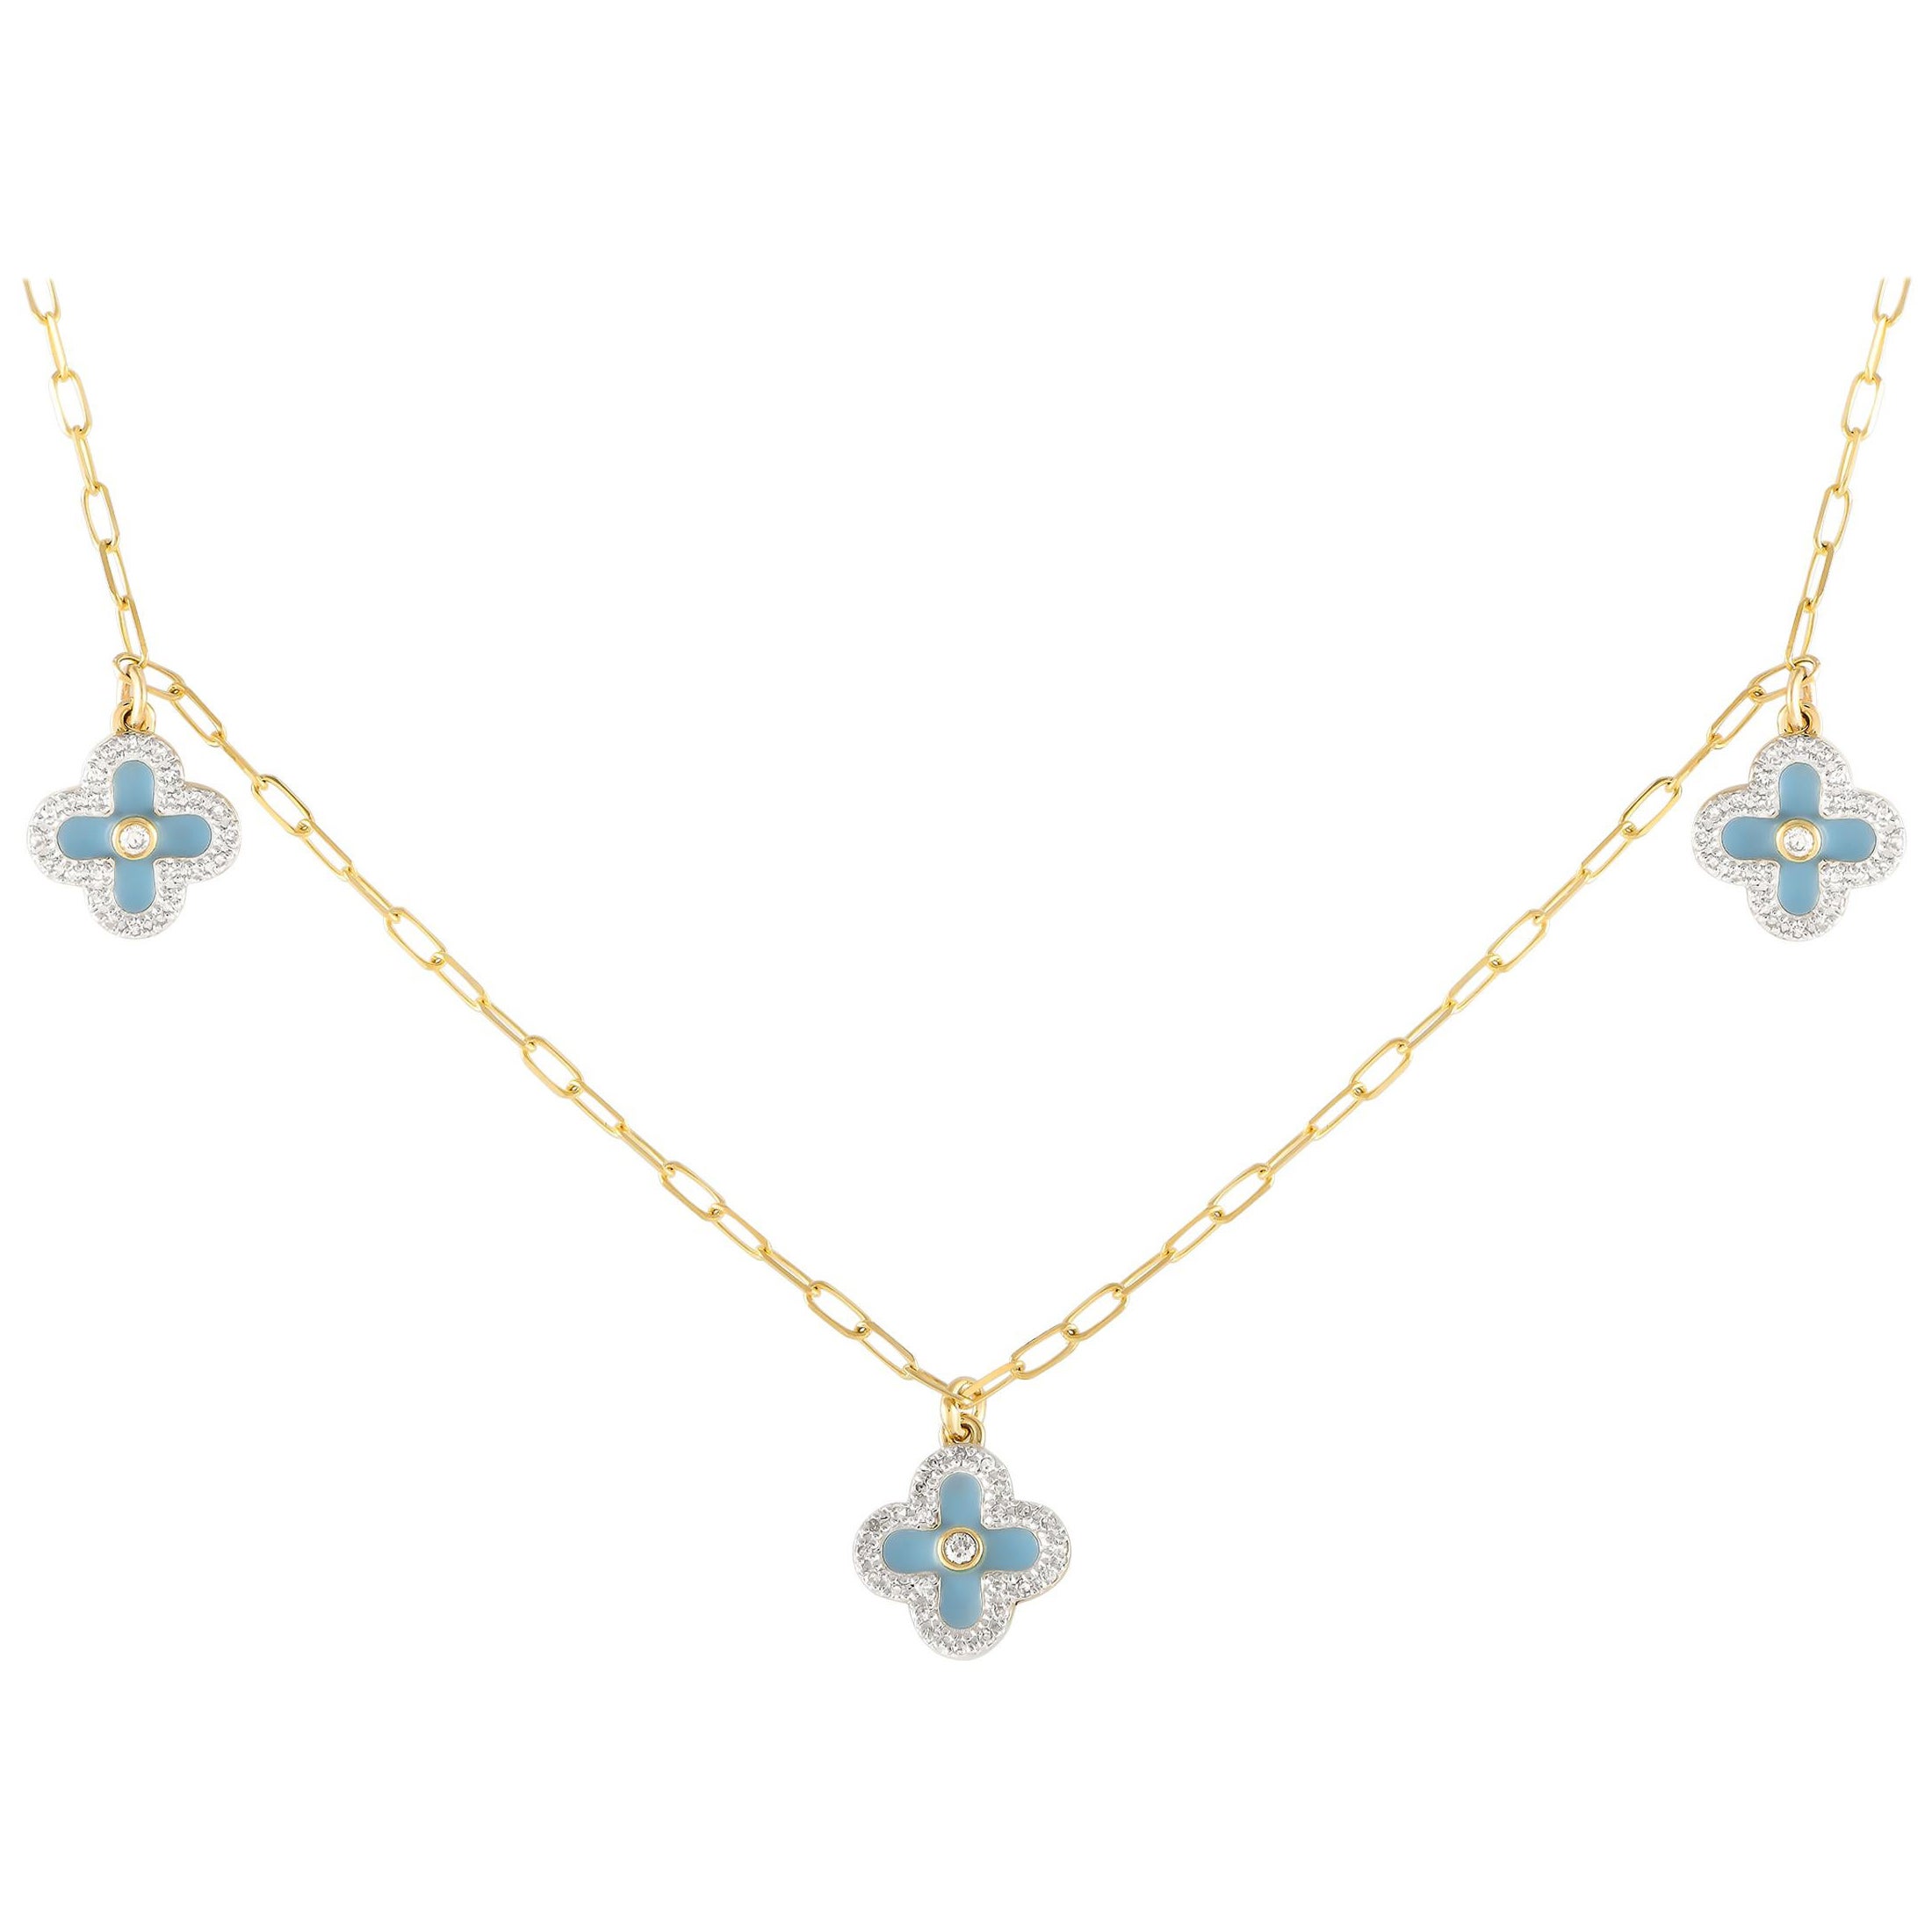 14K Yellow Gold 0.25ct Diamond and Blue Enamel Three Flower Necklace NK01431